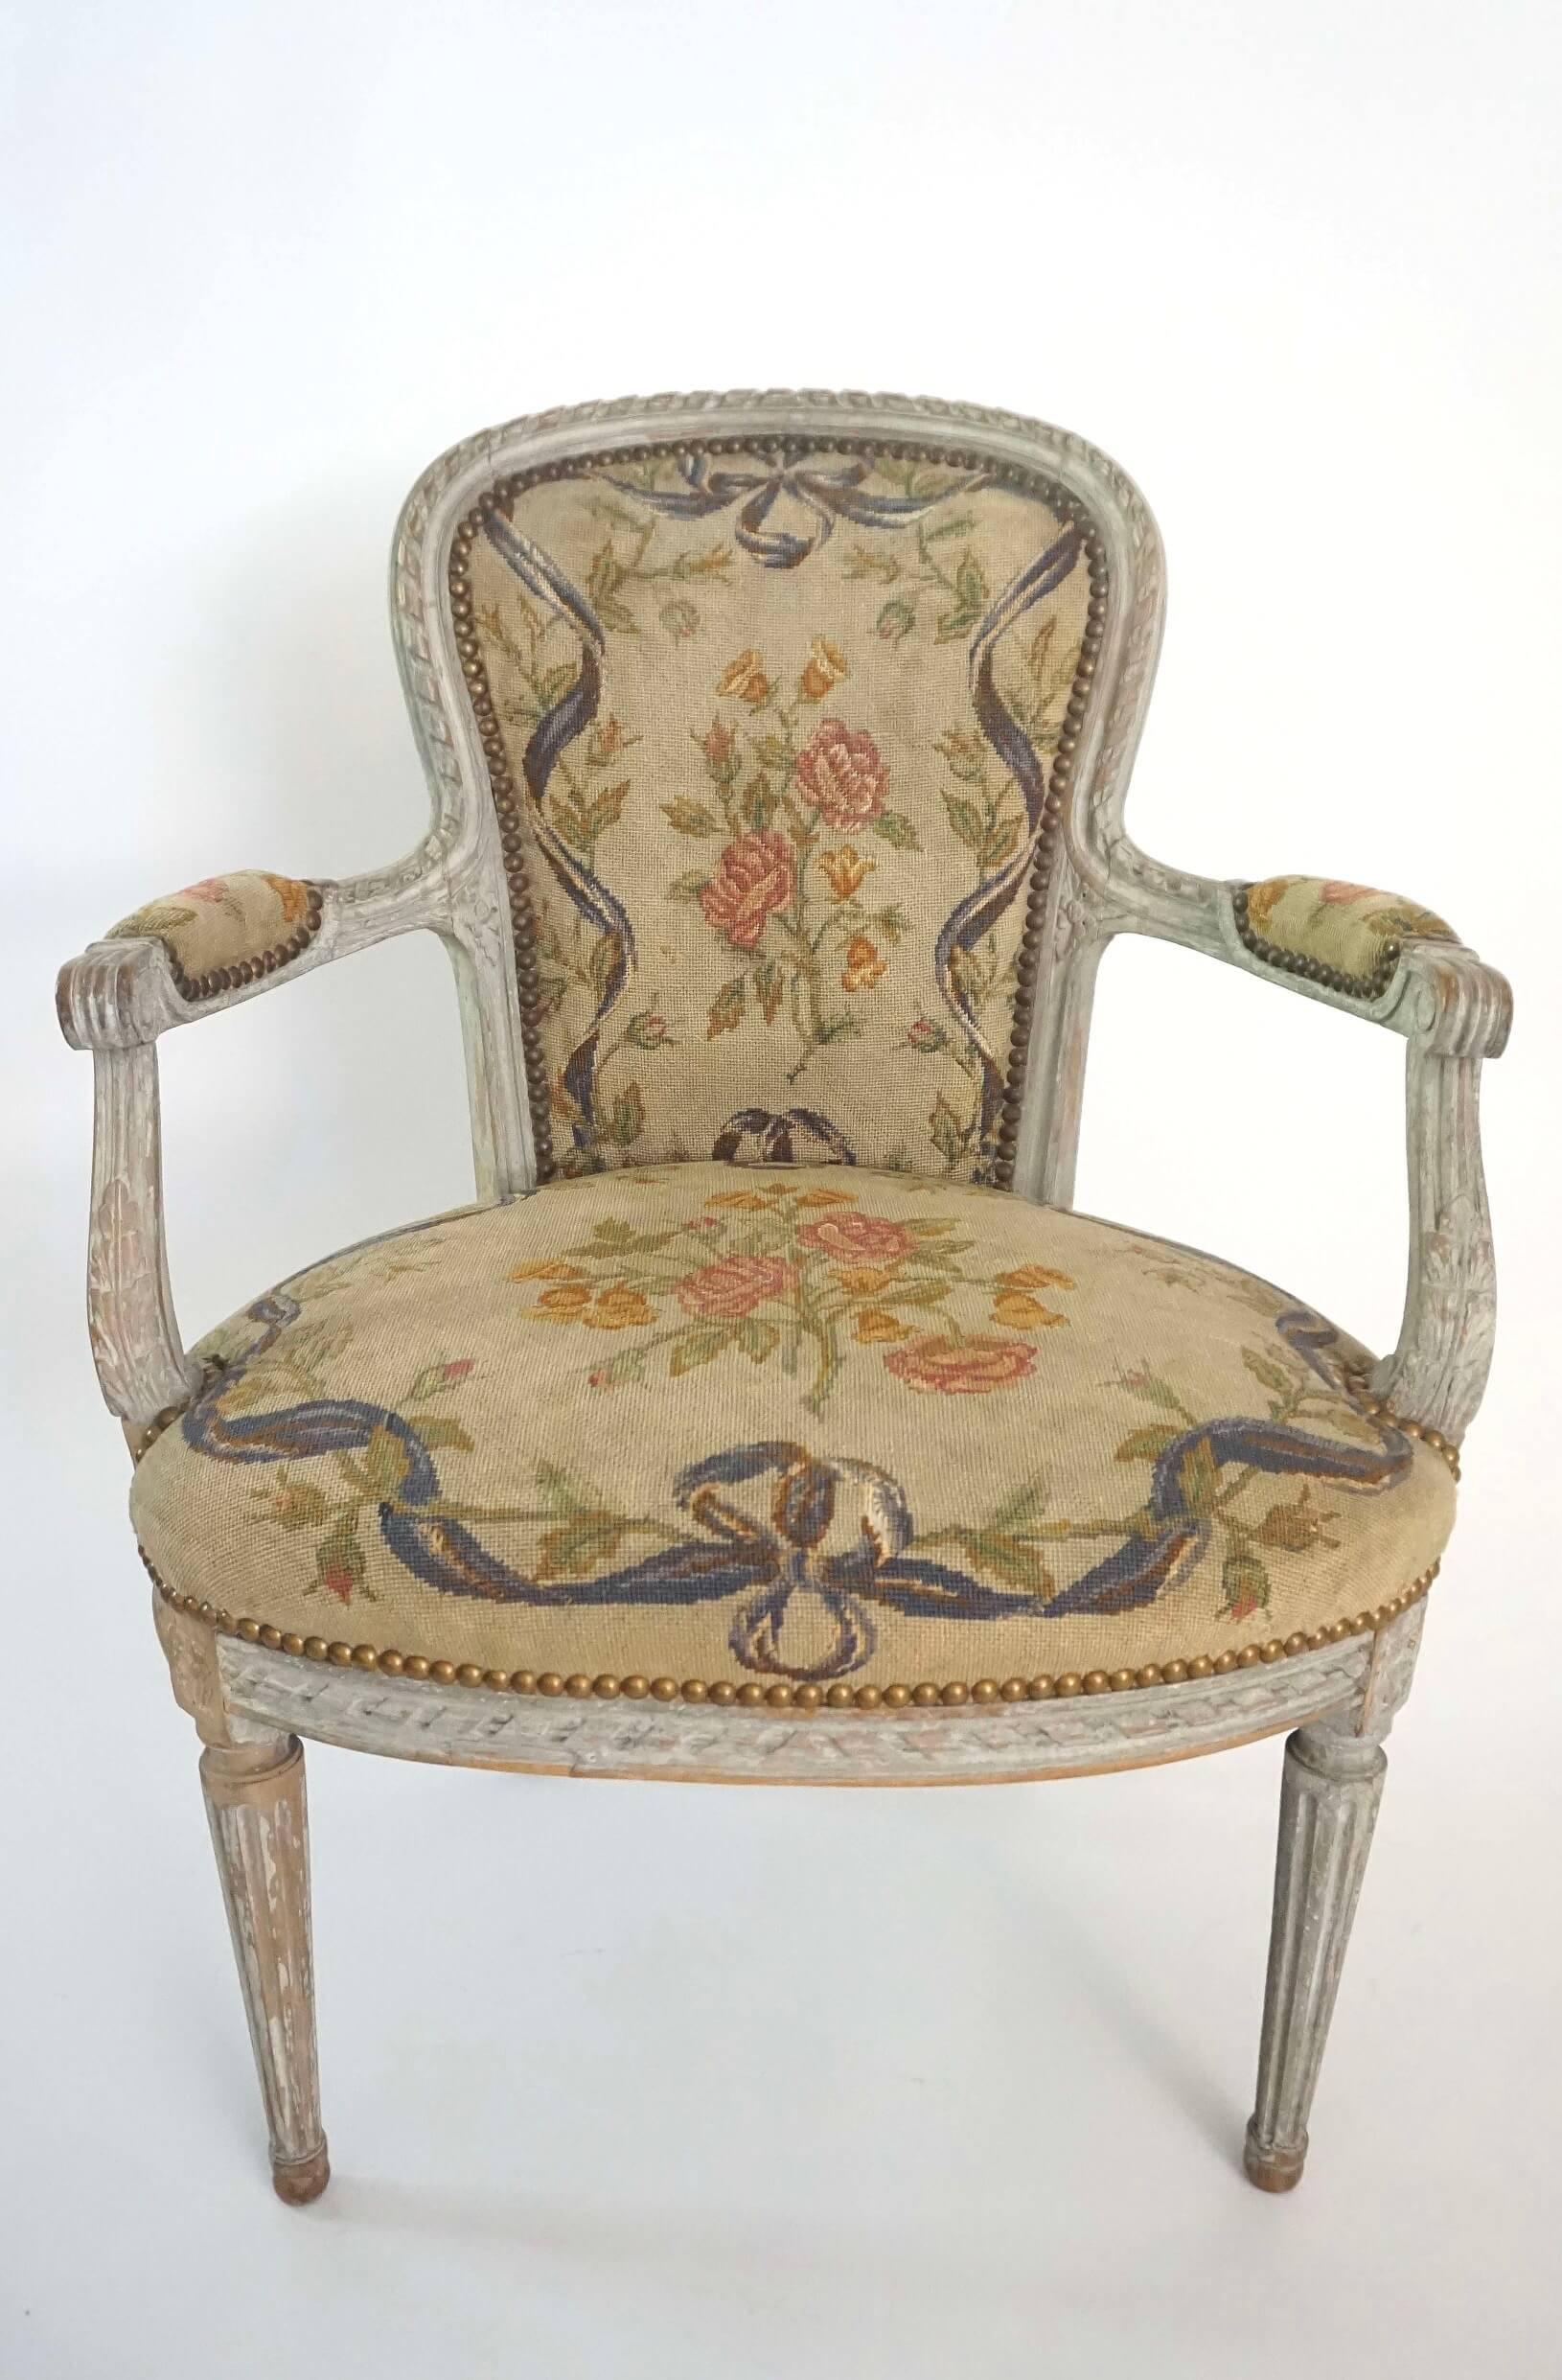 Louis XVI Painted Fauteuil, circa 1770 In Fair Condition For Sale In Kinderhook, NY